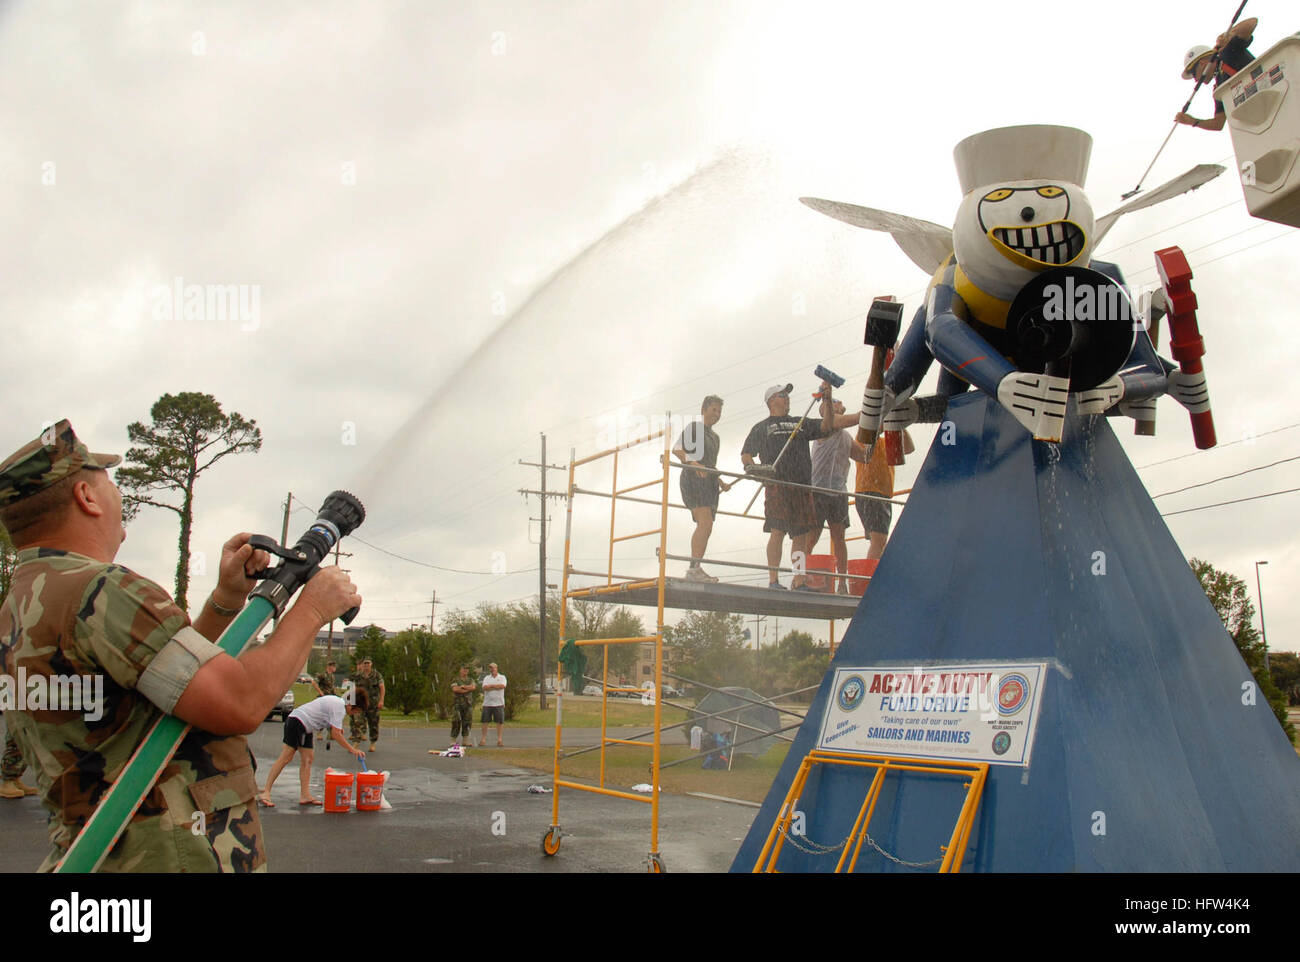 090507-N-2468S-001  GULFPORT, Miss. (May. 7, 2009) Cmdr. Bill Sloan, Chief Staff Officer of the 20th Seabee Readiness Group, aims a water hose at the finalist of the first-ever Naval Construction Battalion Center Gulfport Bee Wash. The approximately $1,000 raised at the event will be donated to the Navy Marine Corps Relief Society. (U.S. Navy photo By Mass Communication Specialist 1st Class Terry Spain/Released) US Navy 090507-N-2468S-001 Cmdr. Bill Sloan, Chief Staff Officer of the 20th Seabee Readiness Group, aims a water hose at the finalist of the first-ever Naval Construction Battalion Ce Stock Photo